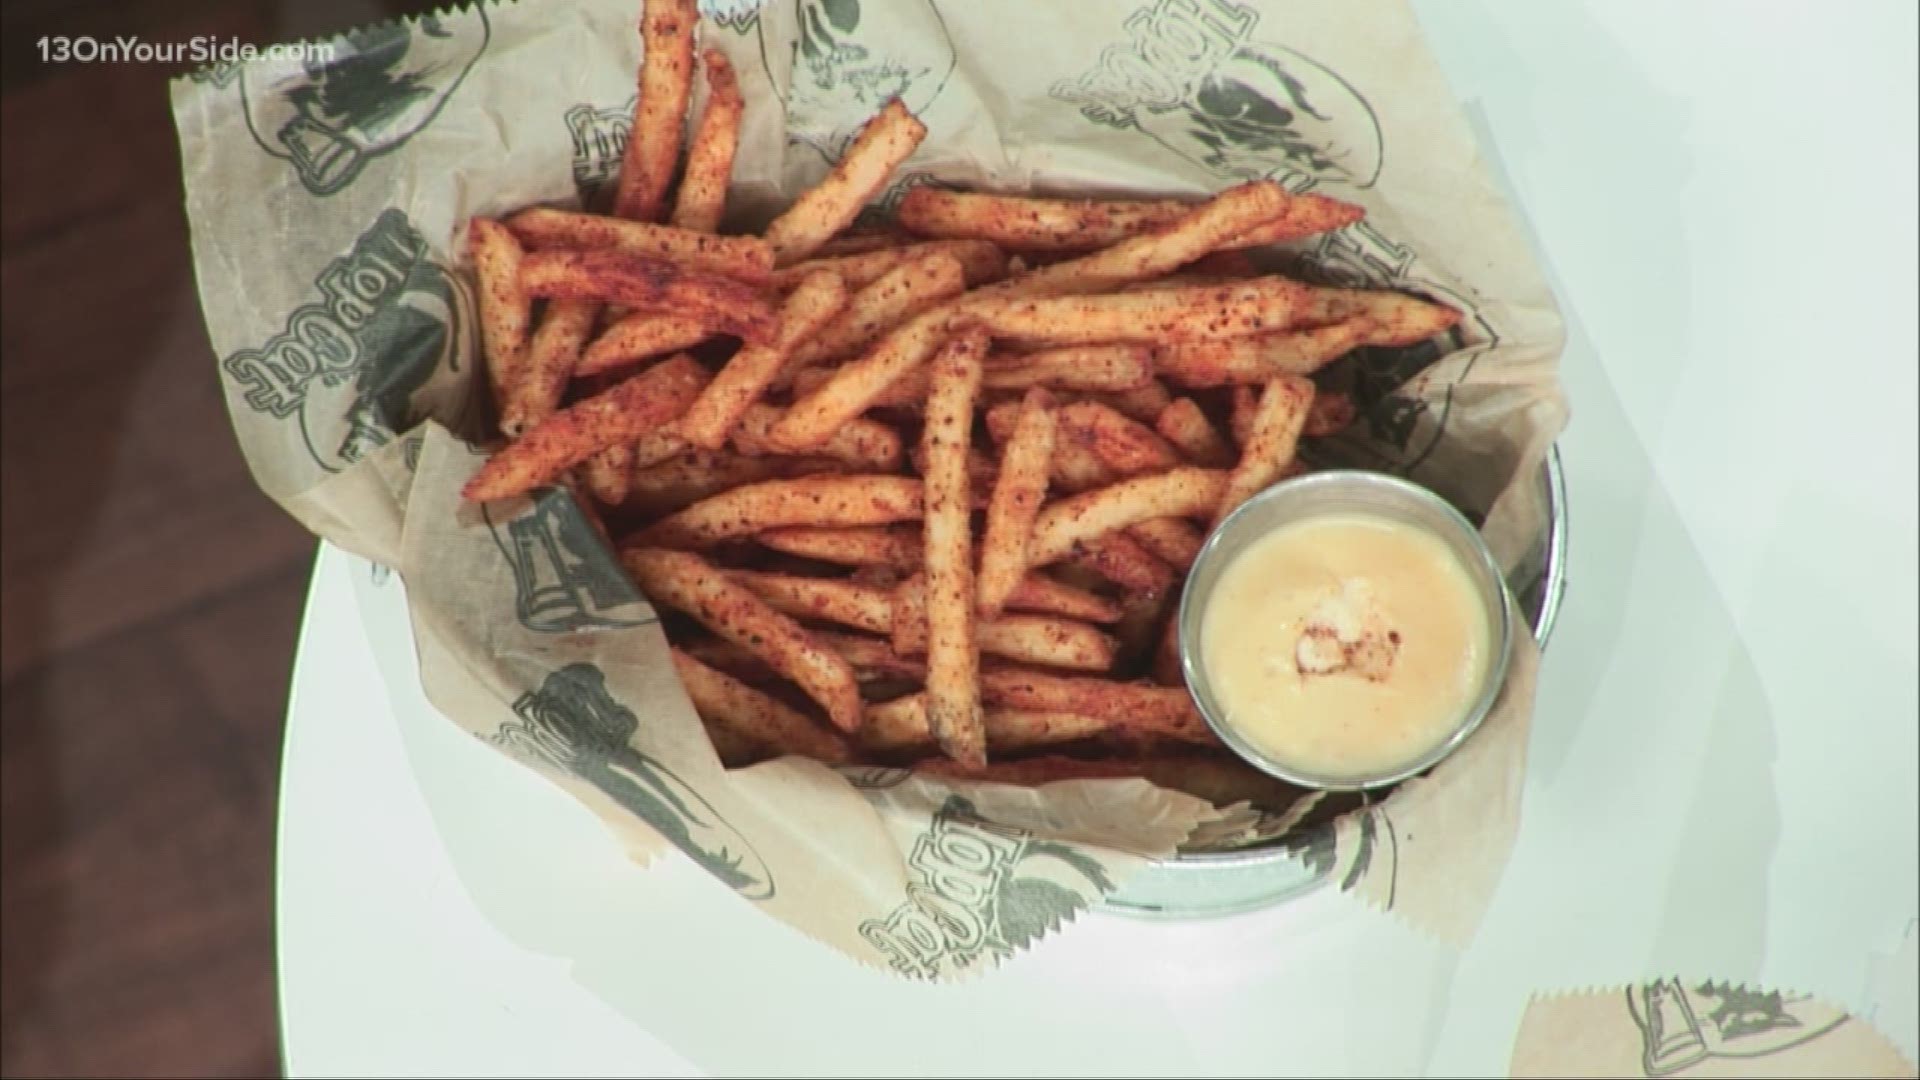 HopCats is looking to add a new flavor of fries to their menu, but they need your help. The restaurant is offering up several options you can try out starting on September 3. Once you test them out, you can vote for your favorite by visiting decidethefries.com and casting your vote.